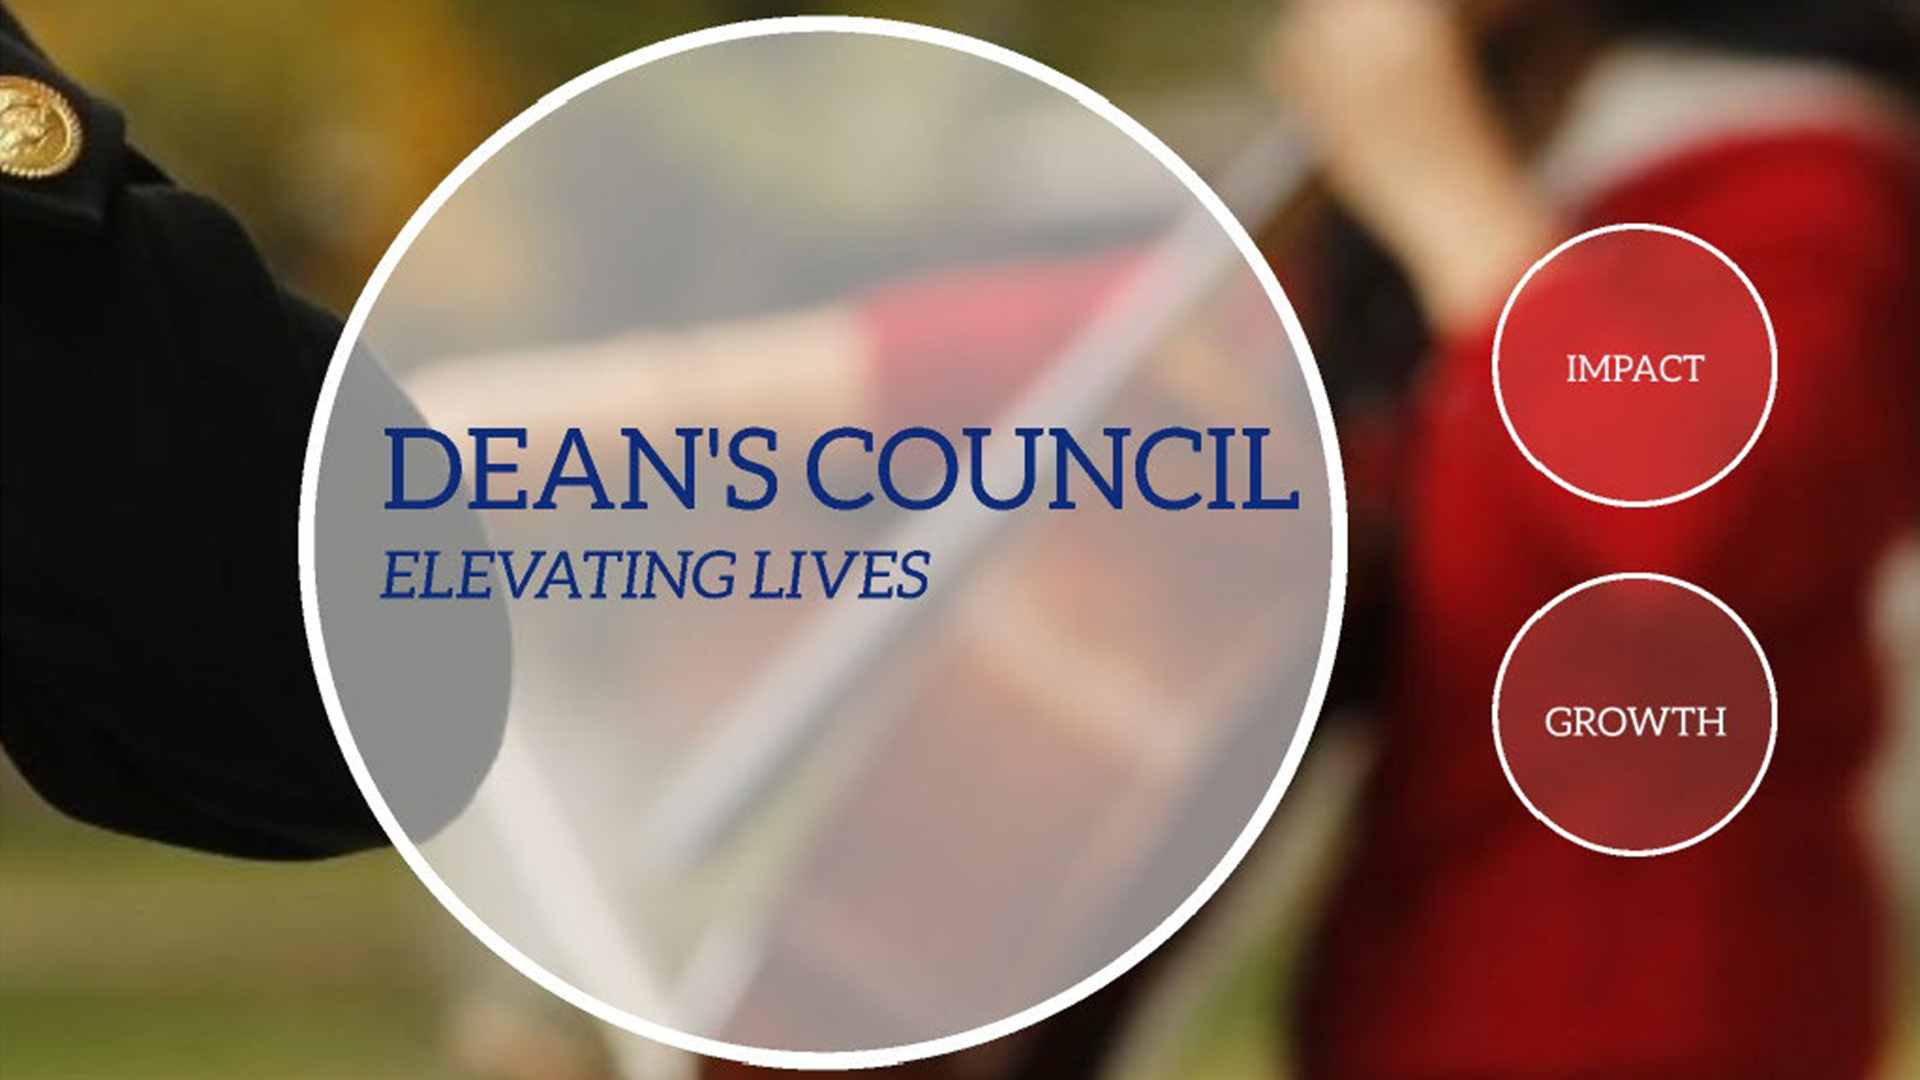 Dean's Council - Elevating Lives: Impact, Growth